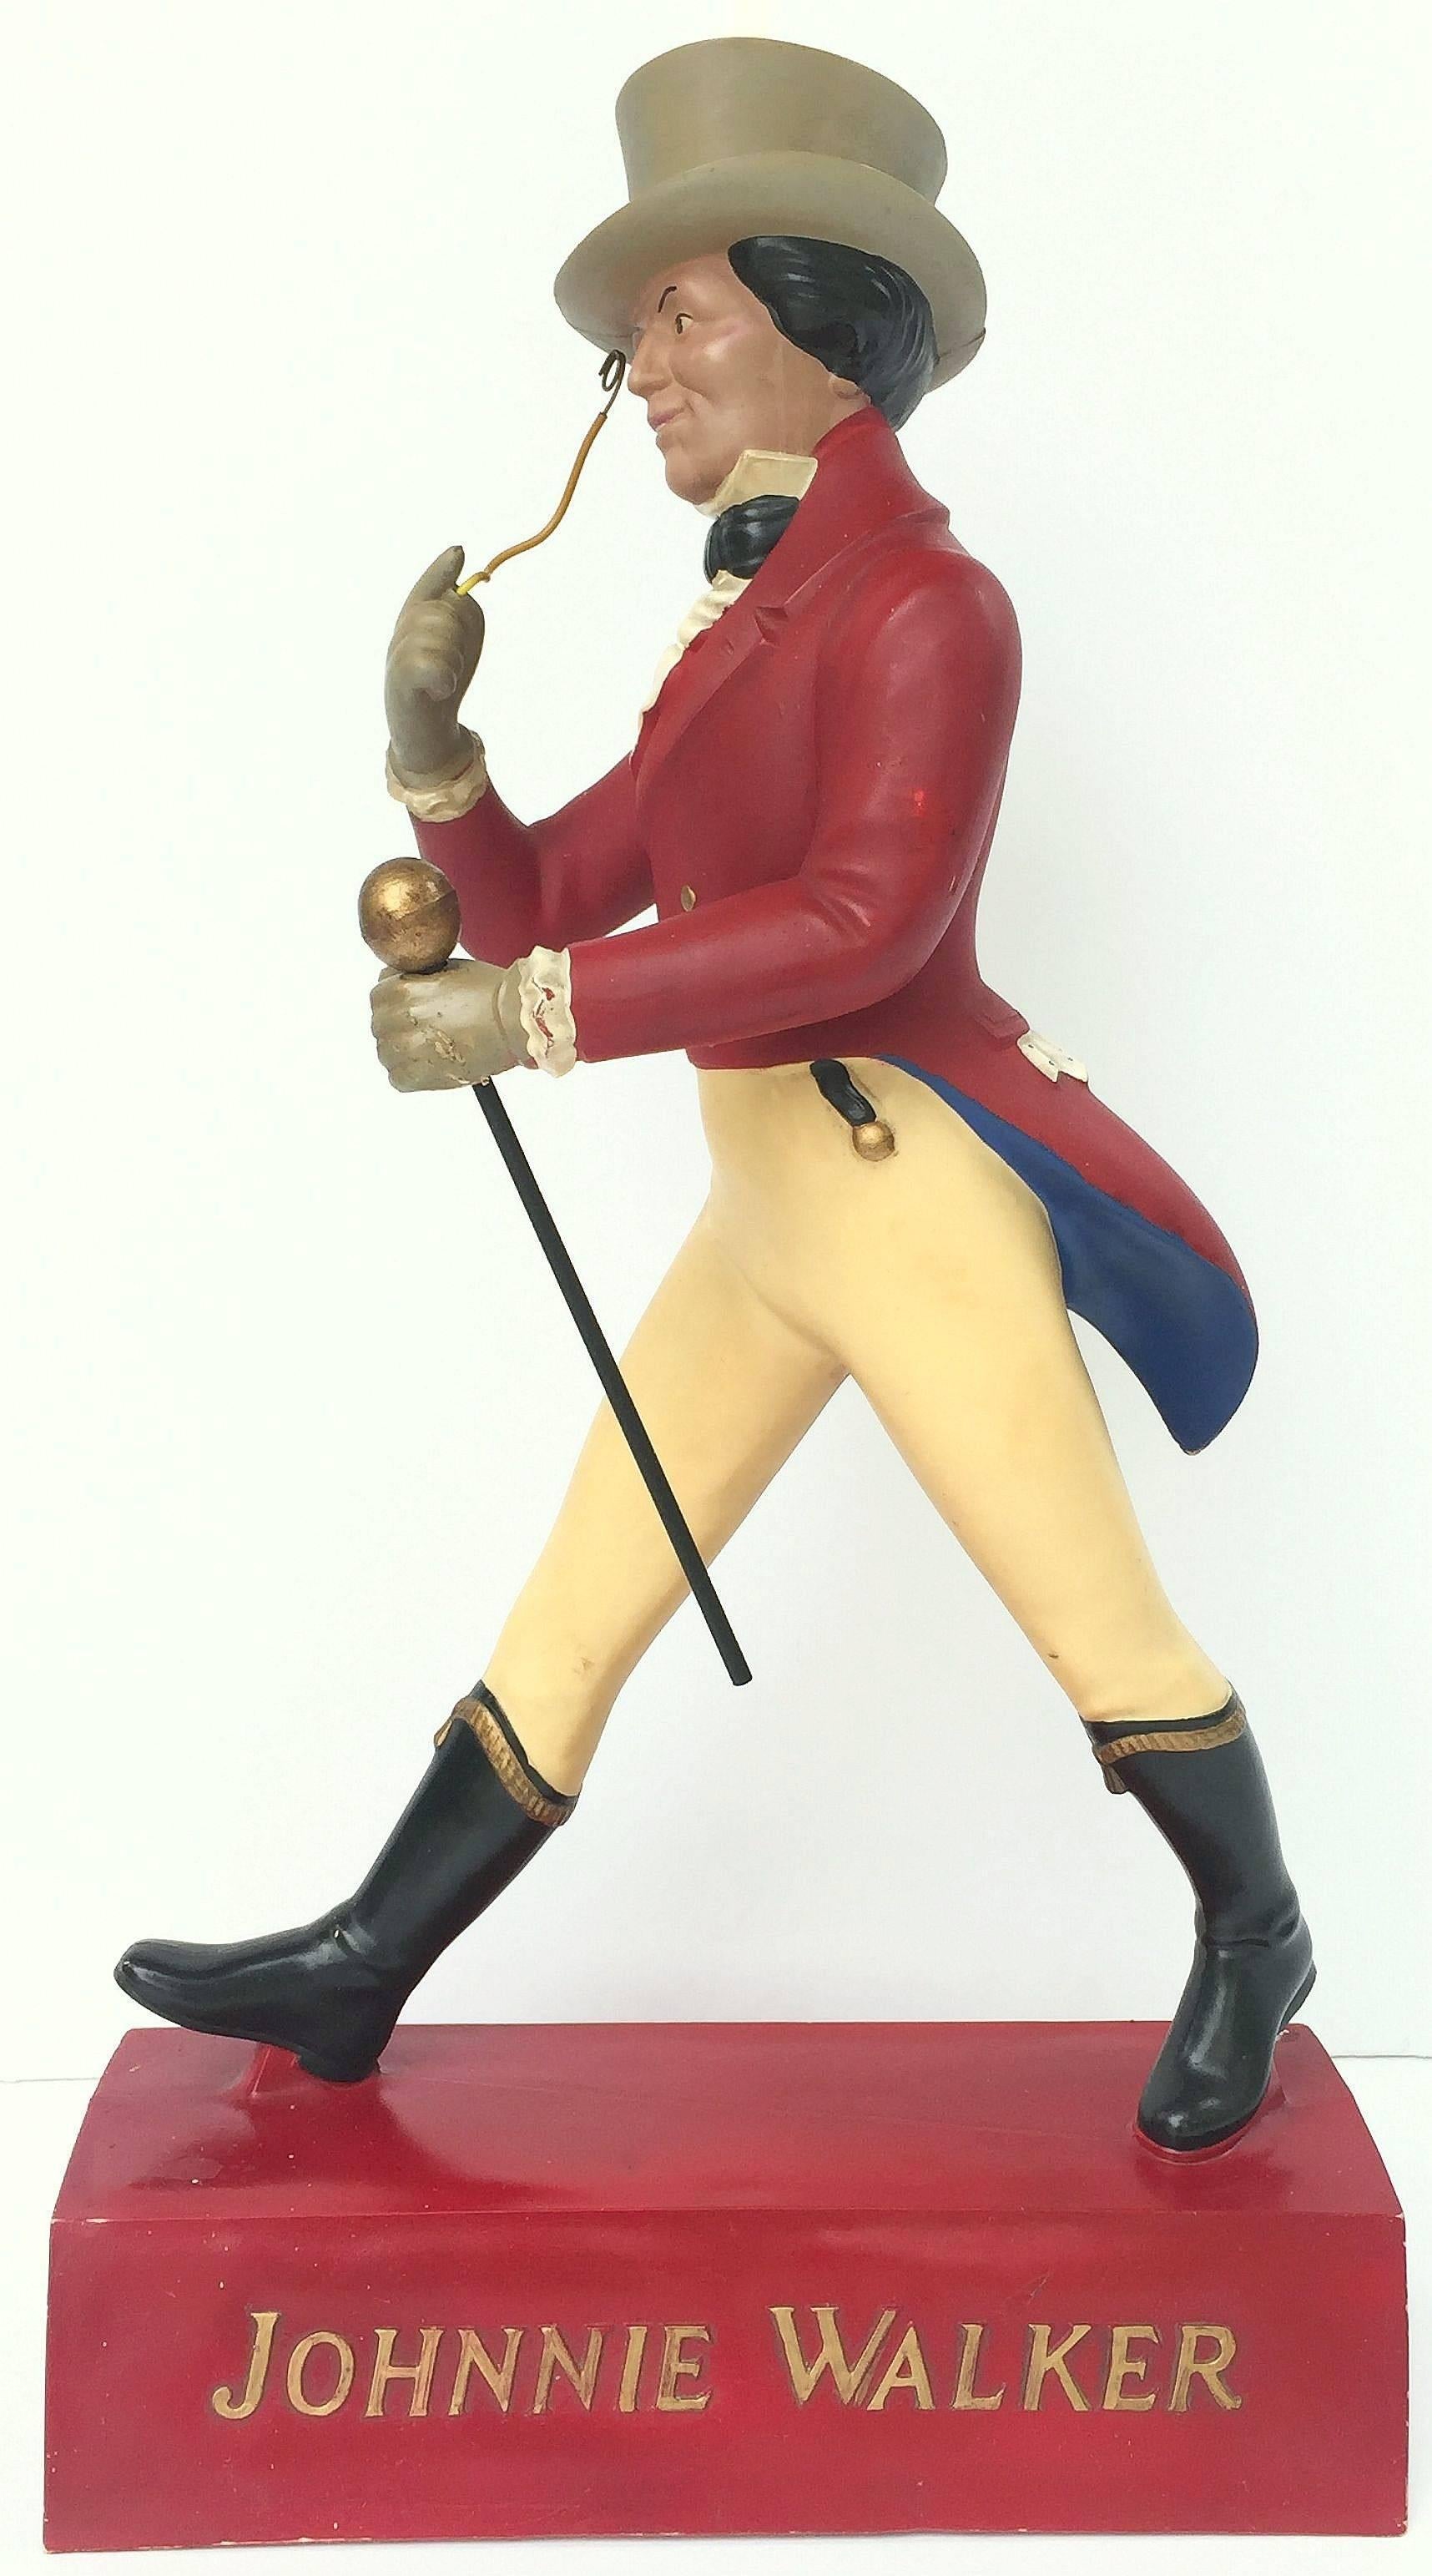 A large vintage advertising prop from Scotland featuring the striding man figurehead or mascot symbol for Johnnie Walker, the celebrated blended scotch whiskey.

The striding man logo, a figure used in their advertisements to this day, was created